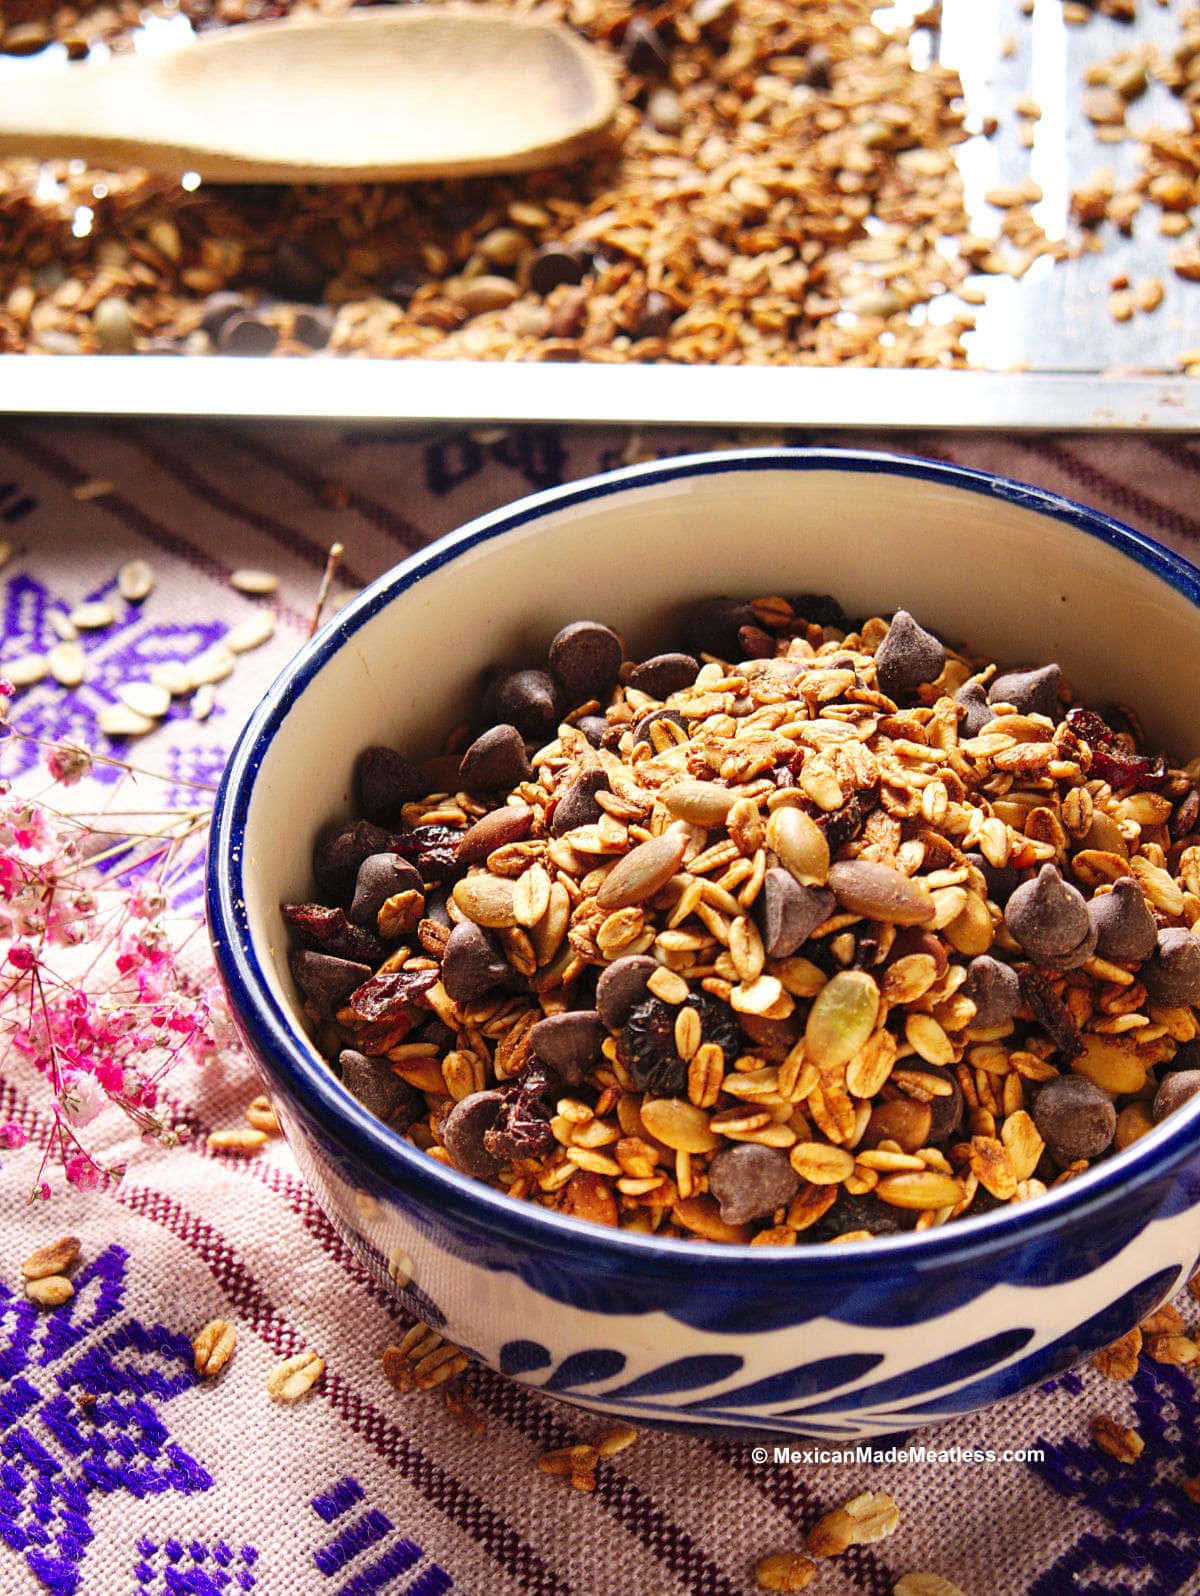 Small Mexican blue and white bowl filled with Mexican style granola.